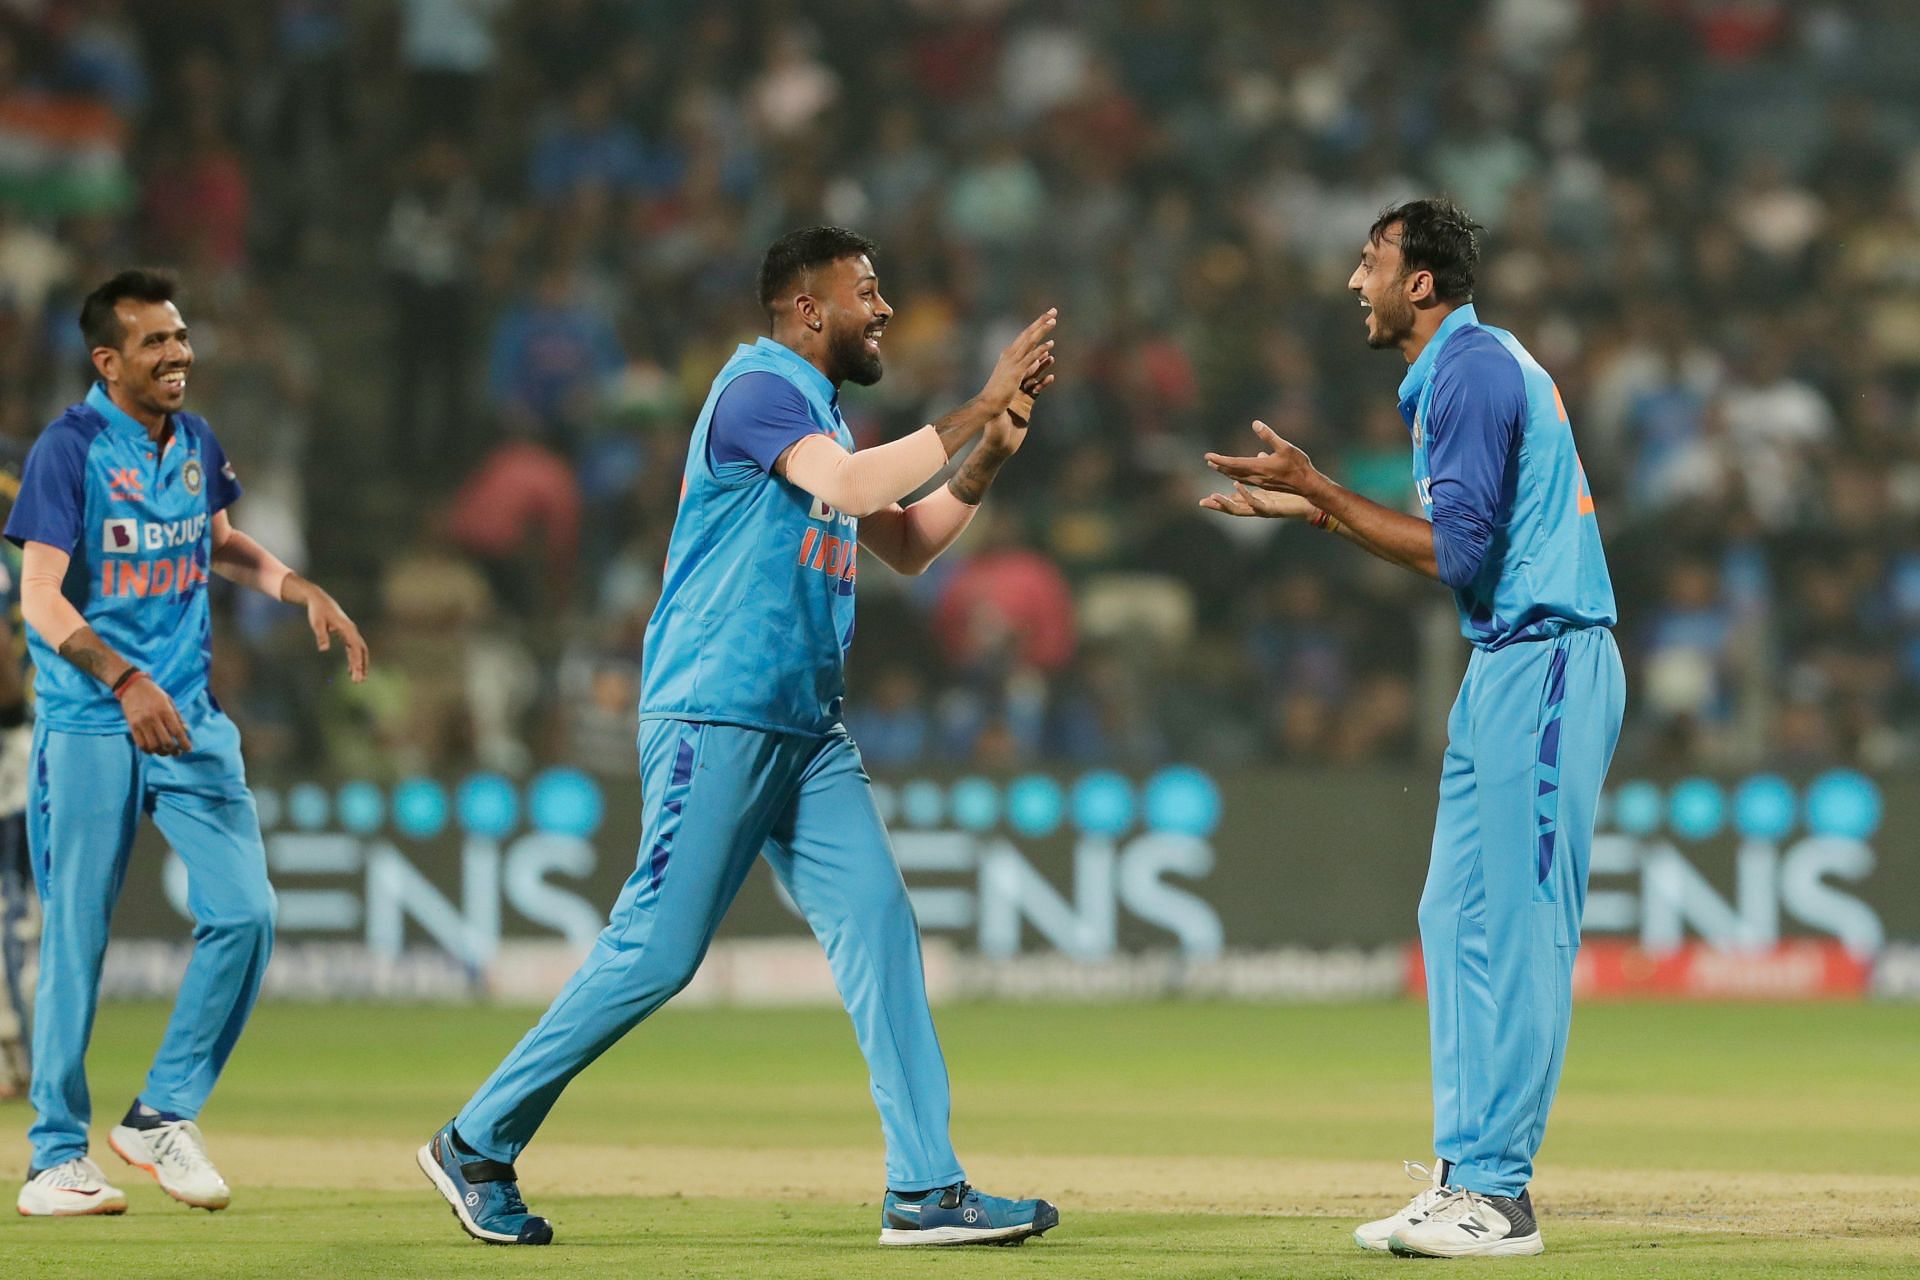 Axar Patel bowled India to victory in the first T20I. (Credits: Twitter)